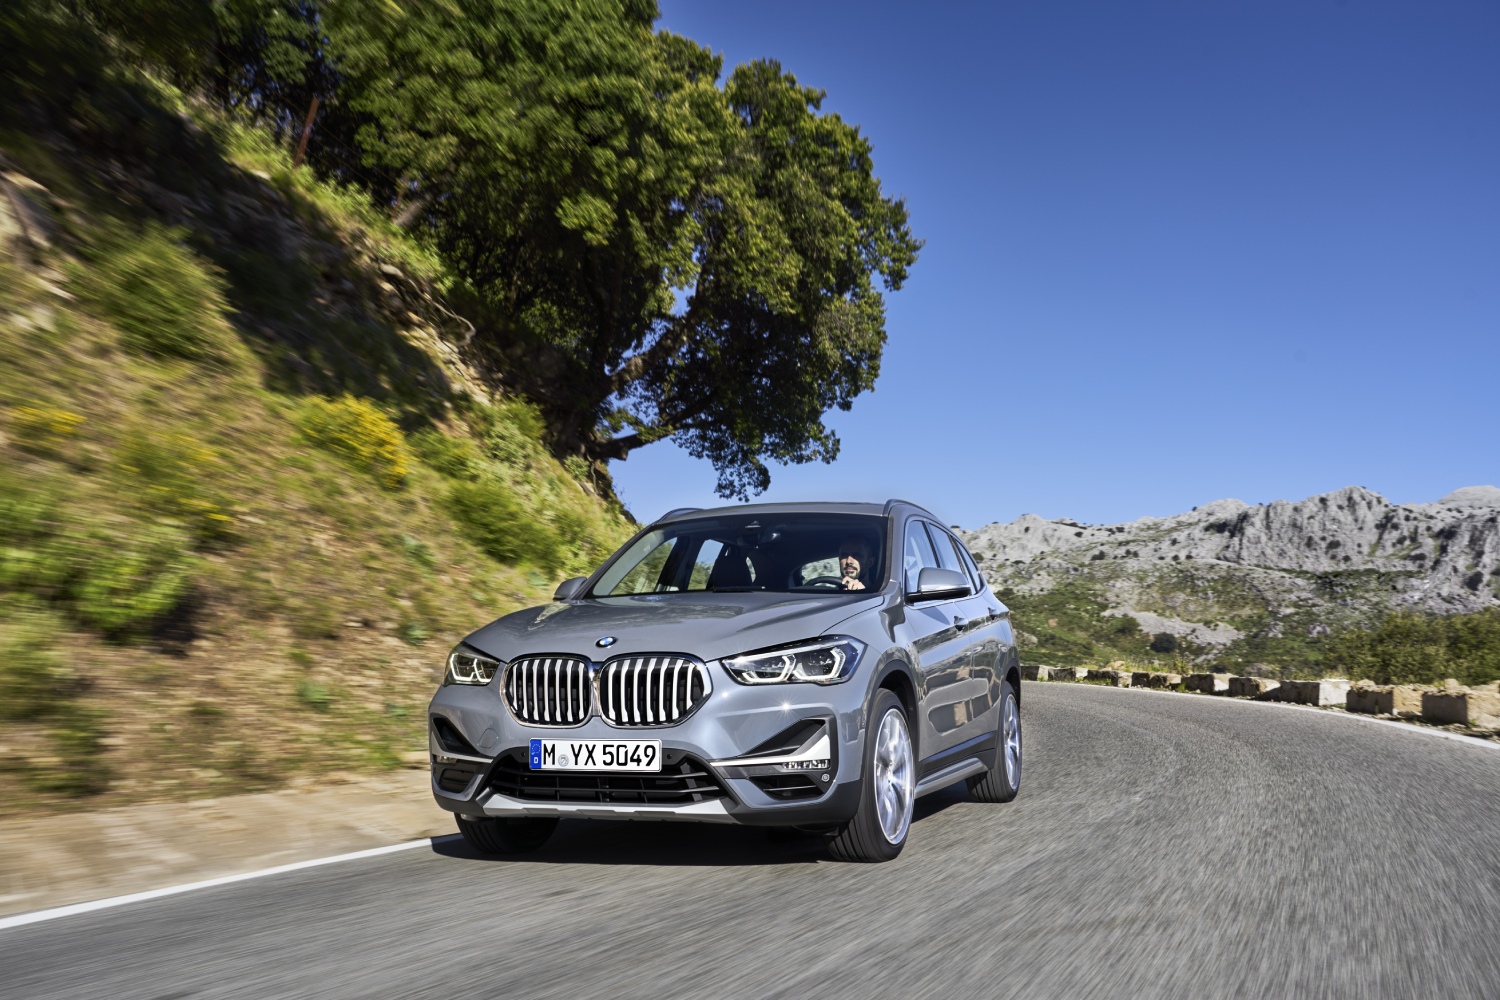 The best small luxury SUVs for 2018 include the BMW X1